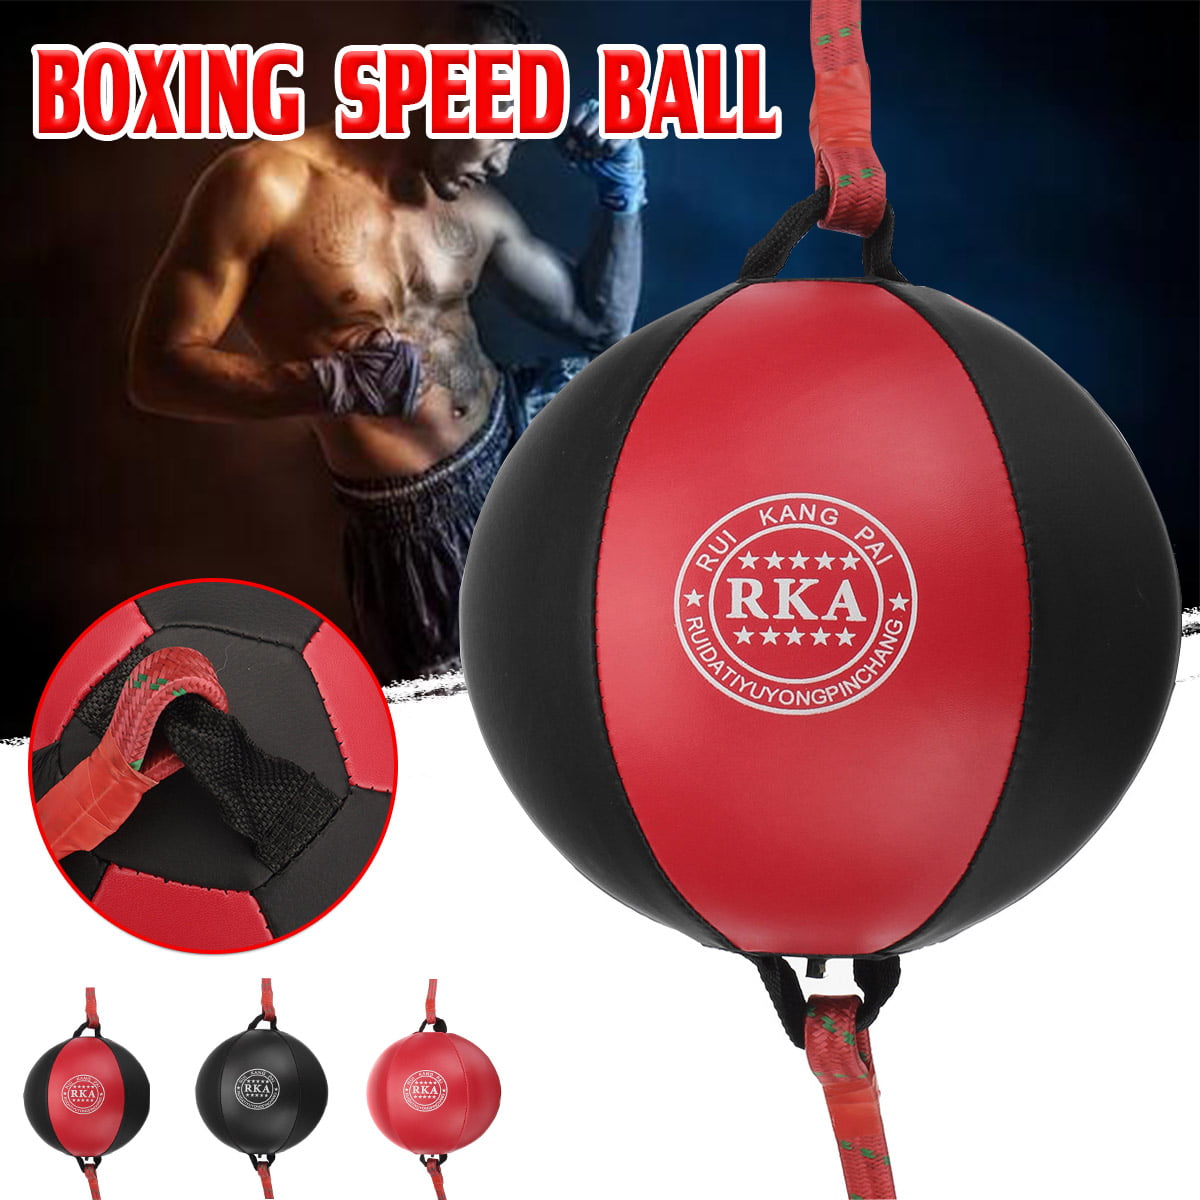 MAGT Boxing Ball PU Leather Double End Ball Hanging Boxing Speed Ball for Training Punching Speed Exercise Agility 